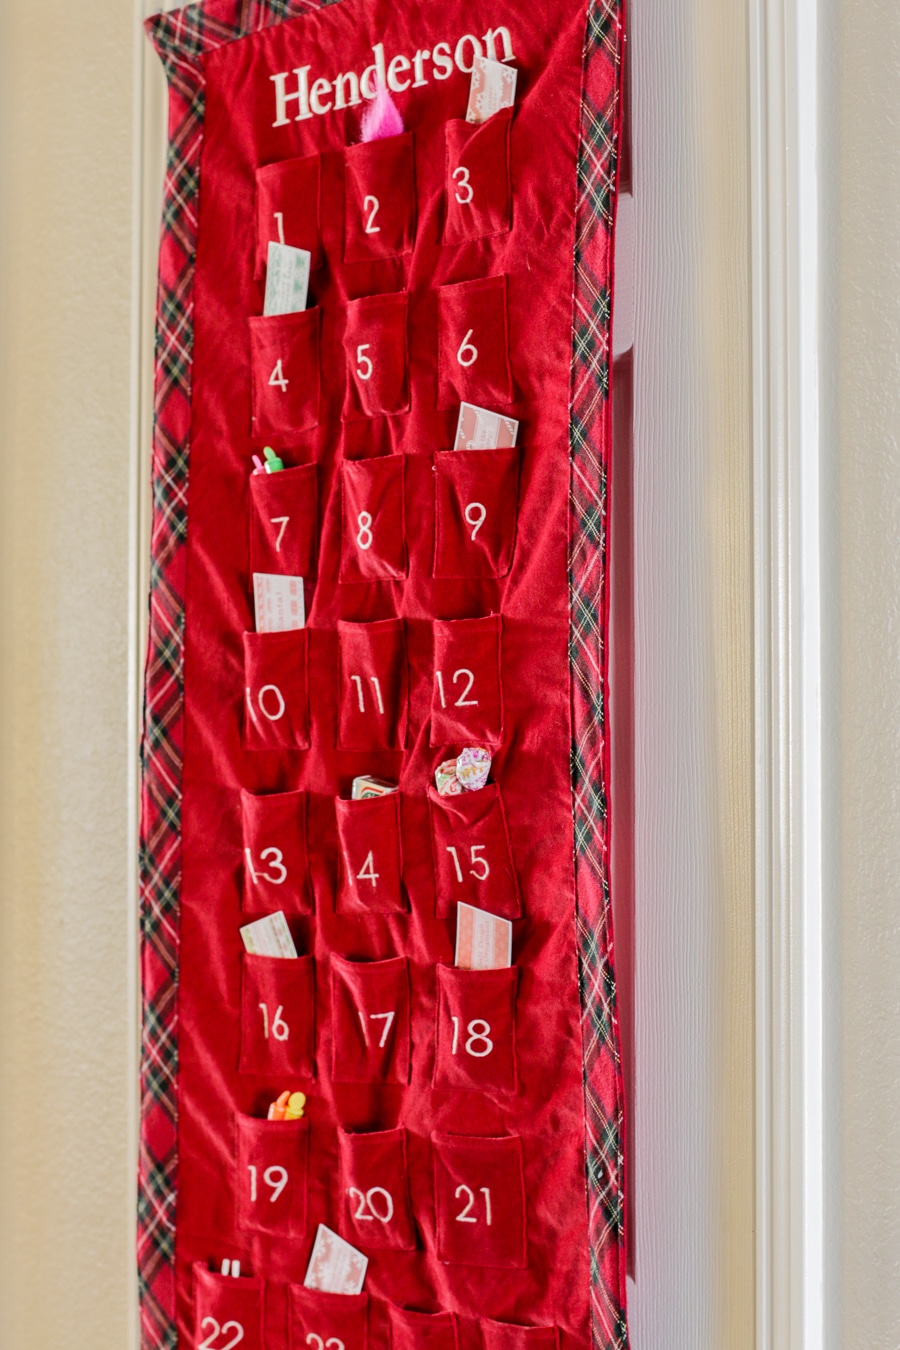 Fill your advent calendar with thoughtful gestures and fun Christmas activities